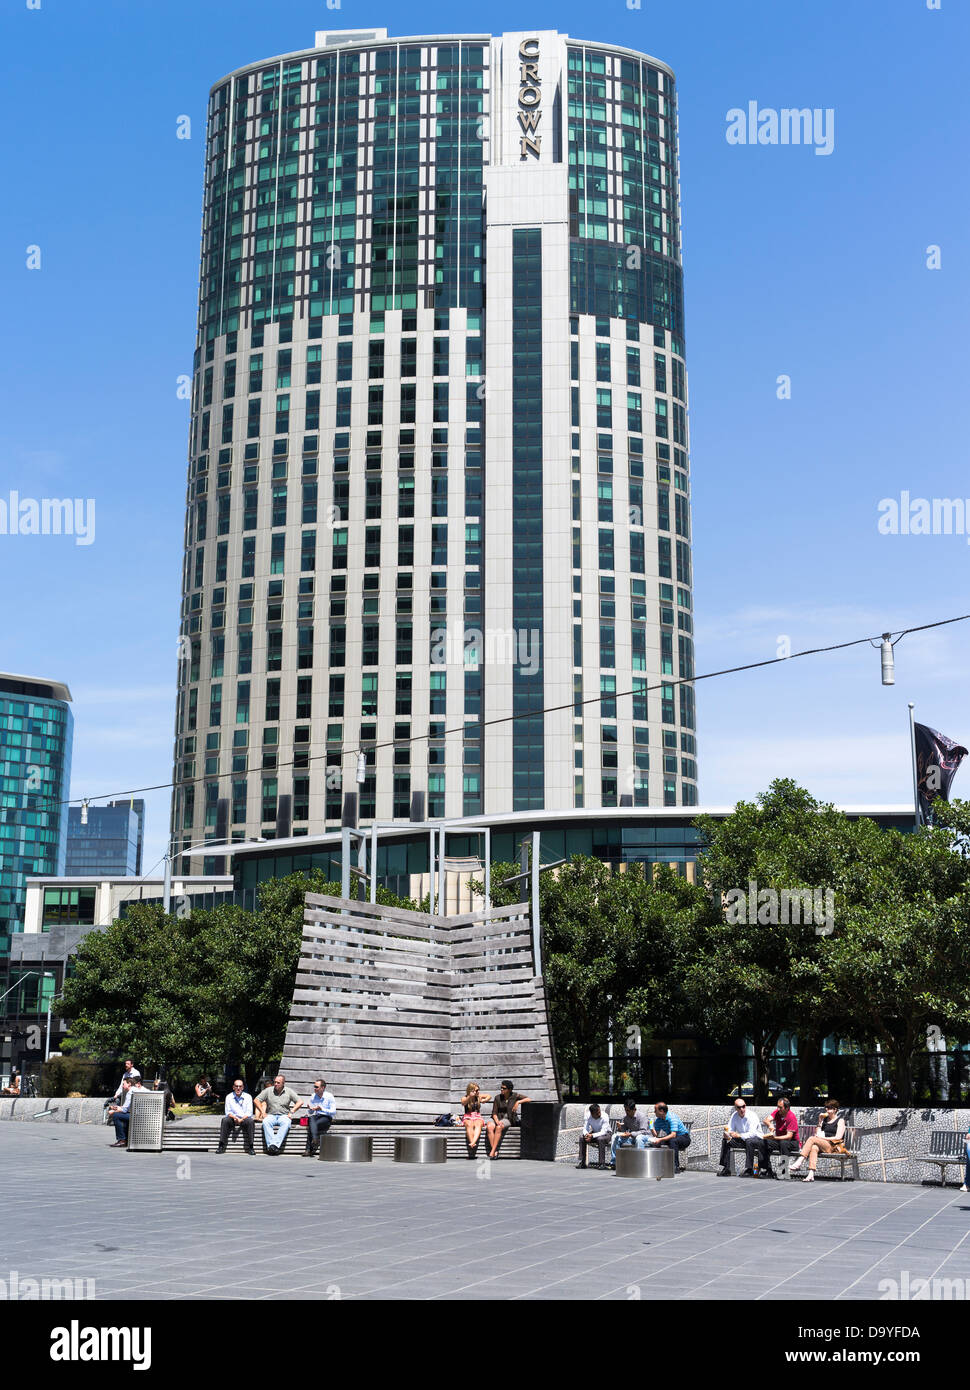 dh  MELBOURNE AUSTRALIA Crown Casino and entertainment centre Melbourne people sitting relaxing tower block hotel city exterior Stock Photo